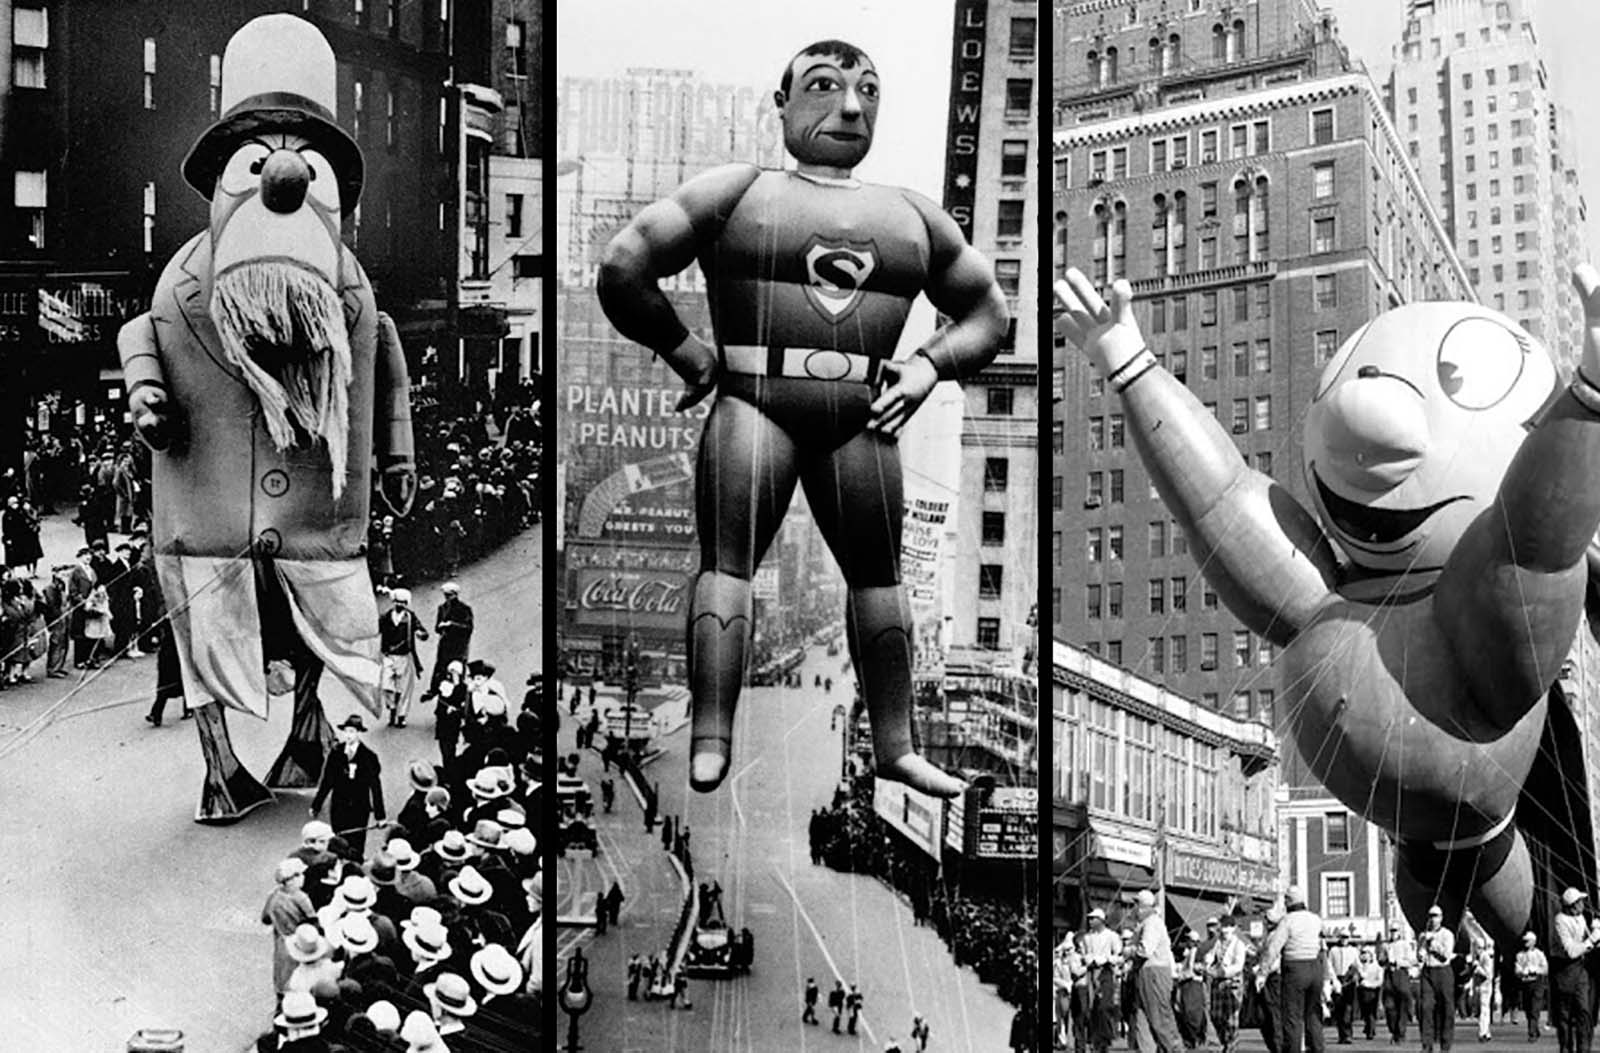 Amazing Vintage Photos of the Macy's Thanksgiving Day Parade from the Early Days, 1920s-1950s